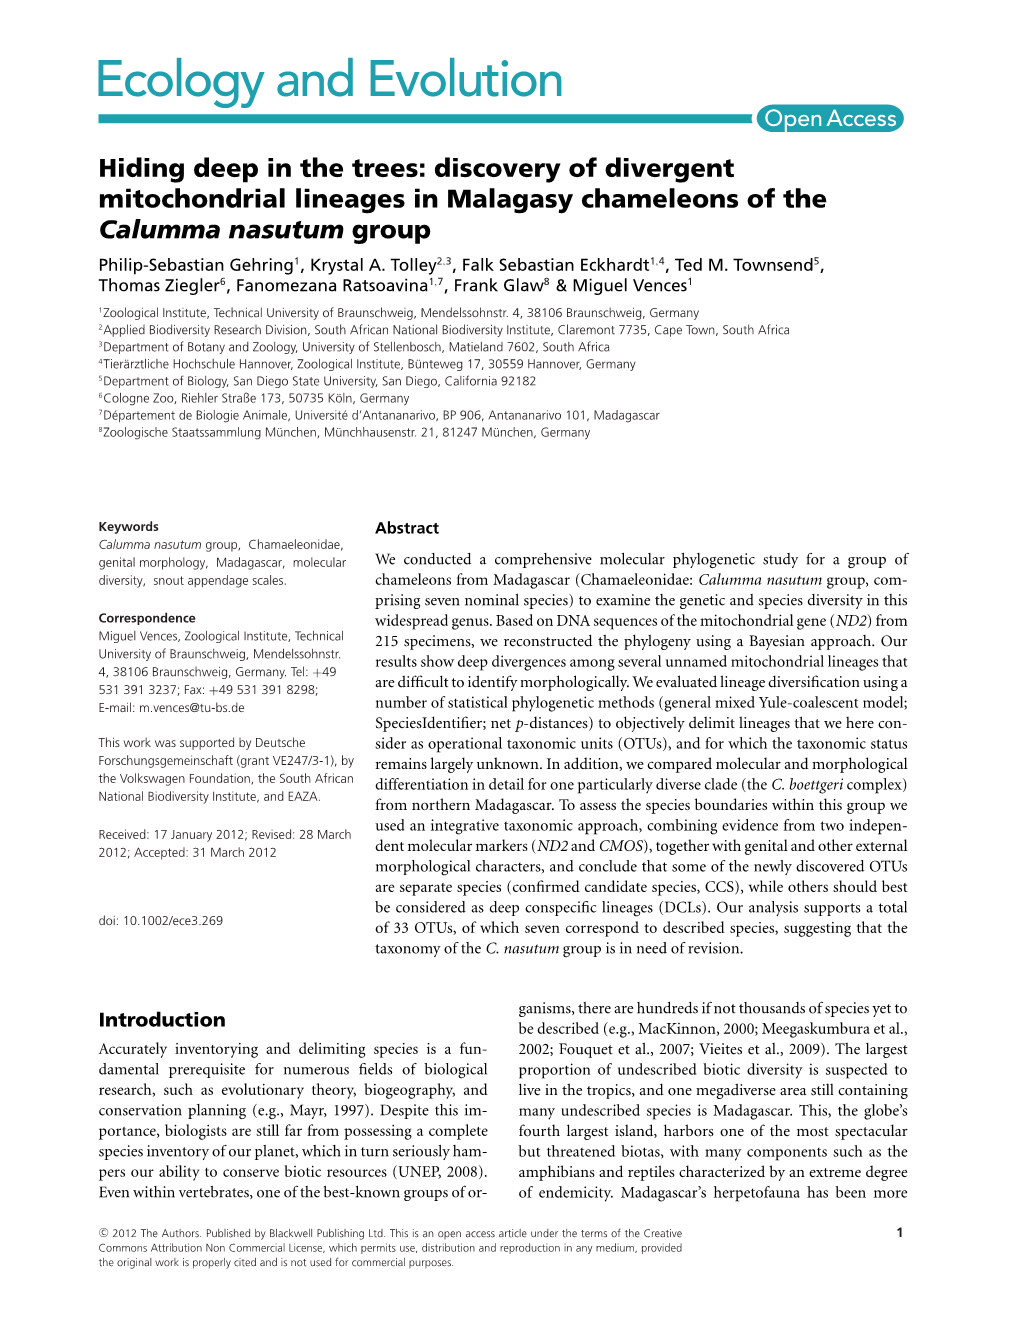 Discovery of Divergent Mitochondrial Lineages in Malagasy Chameleons of the Calumma Nasutum Group Philip-Sebastian Gehring1, Krystal A